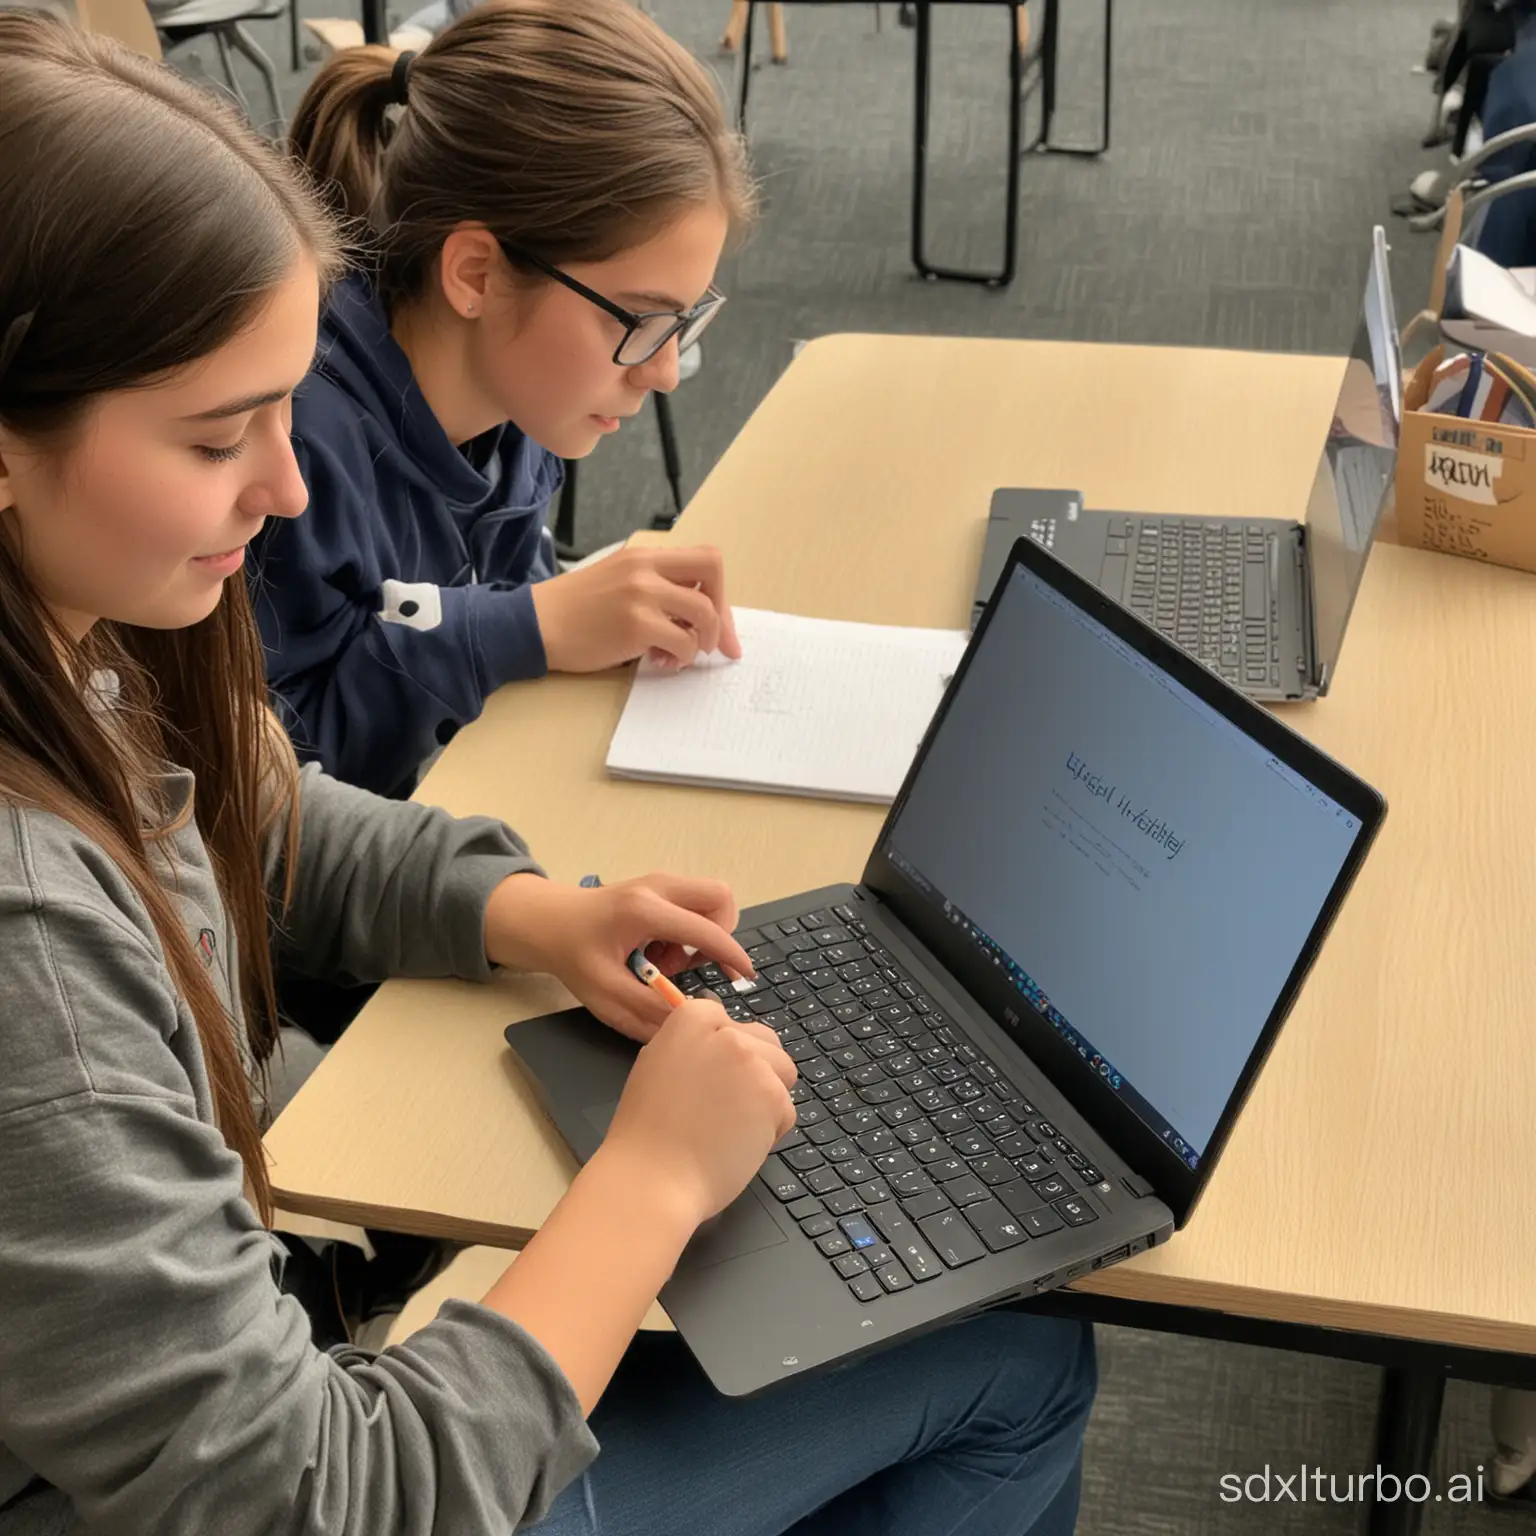 Students-Writing-Together-with-a-Laptop